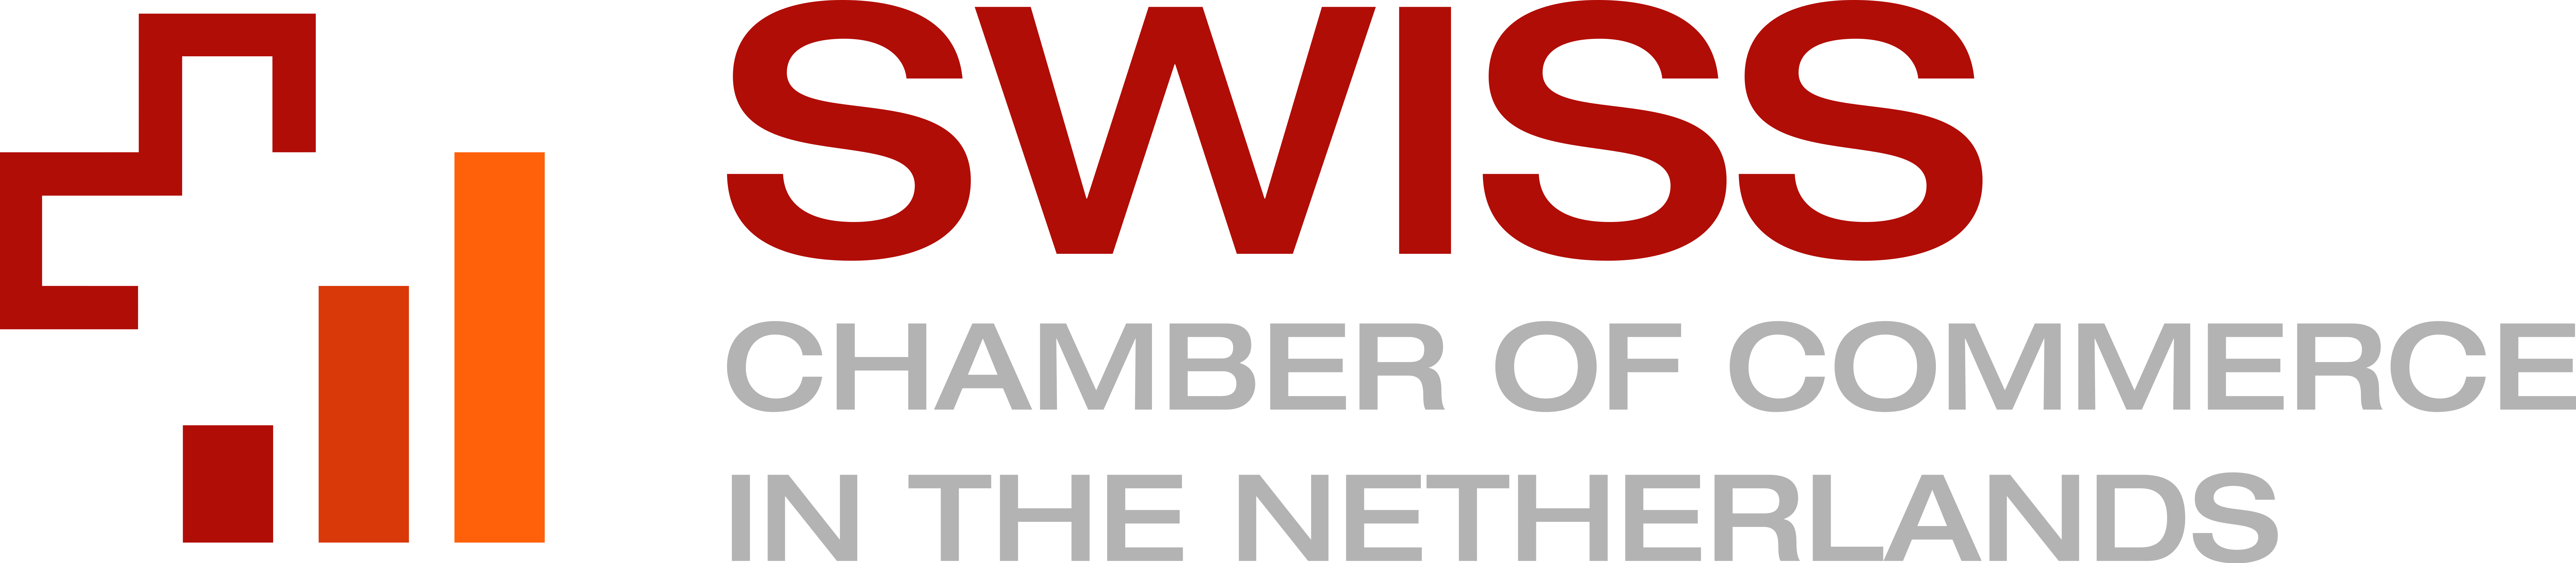 Swiss Chamber of Commerce in The Netherlands (Est. 1933)